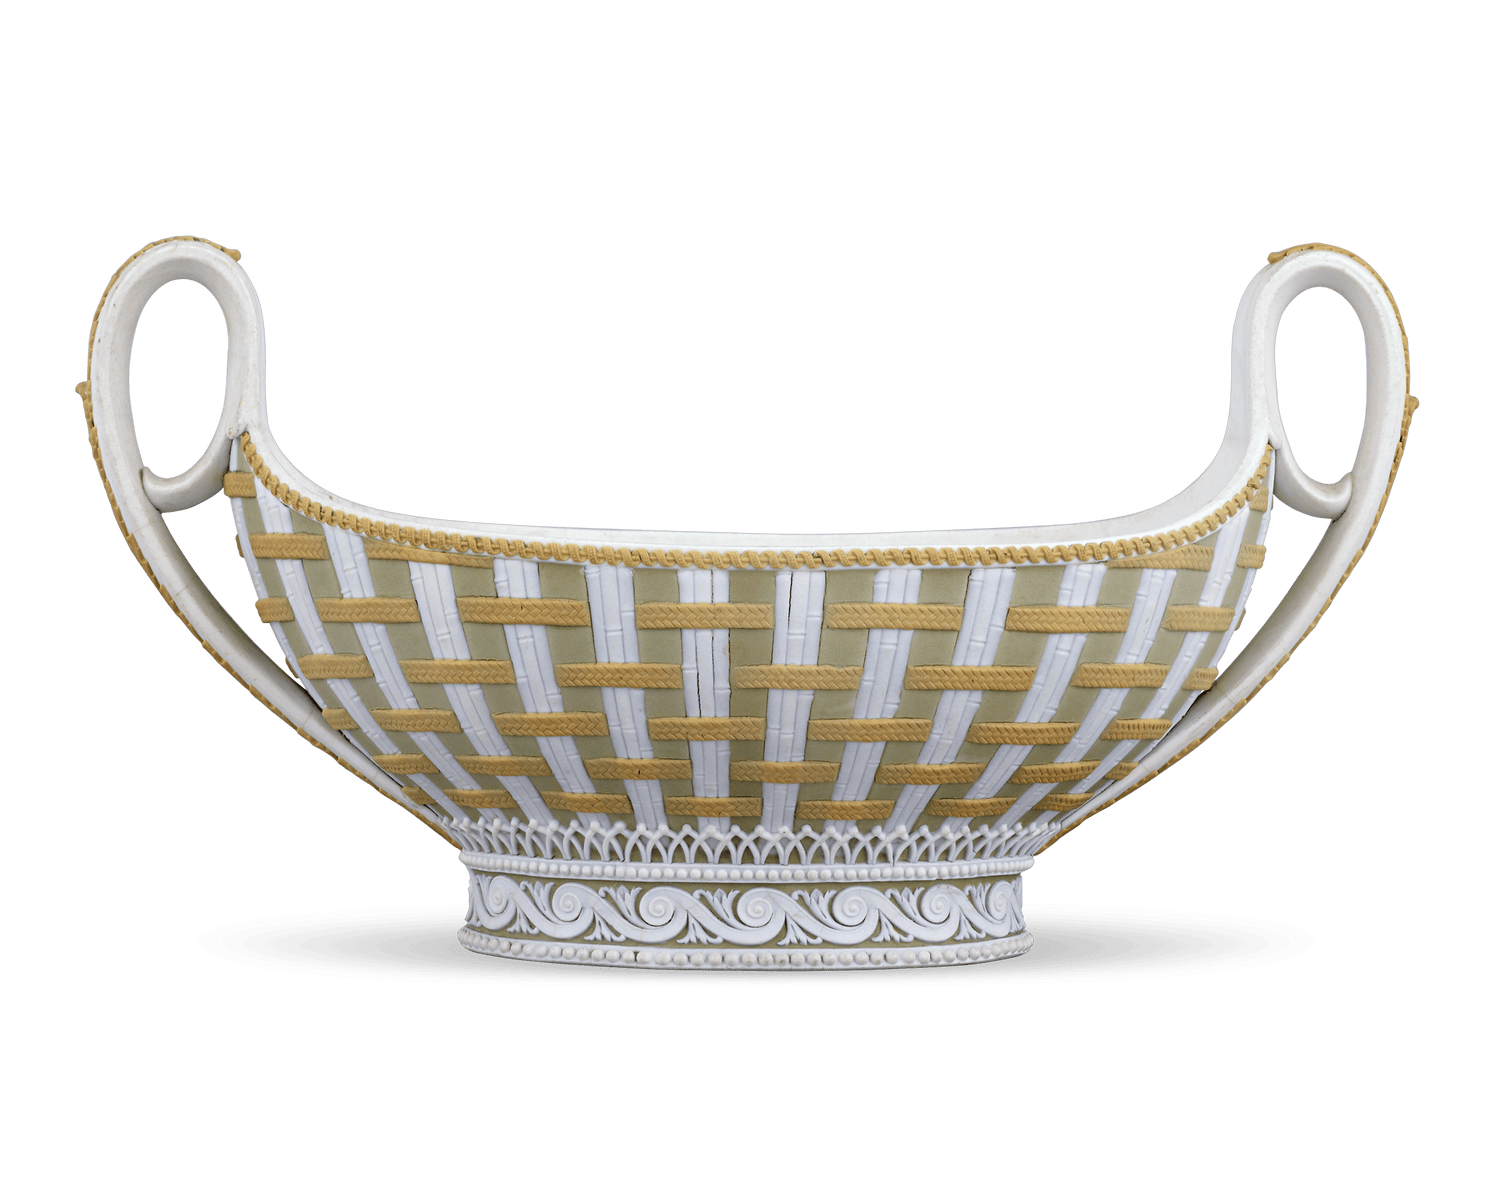 Wedgwood Tricolor Sauceboat